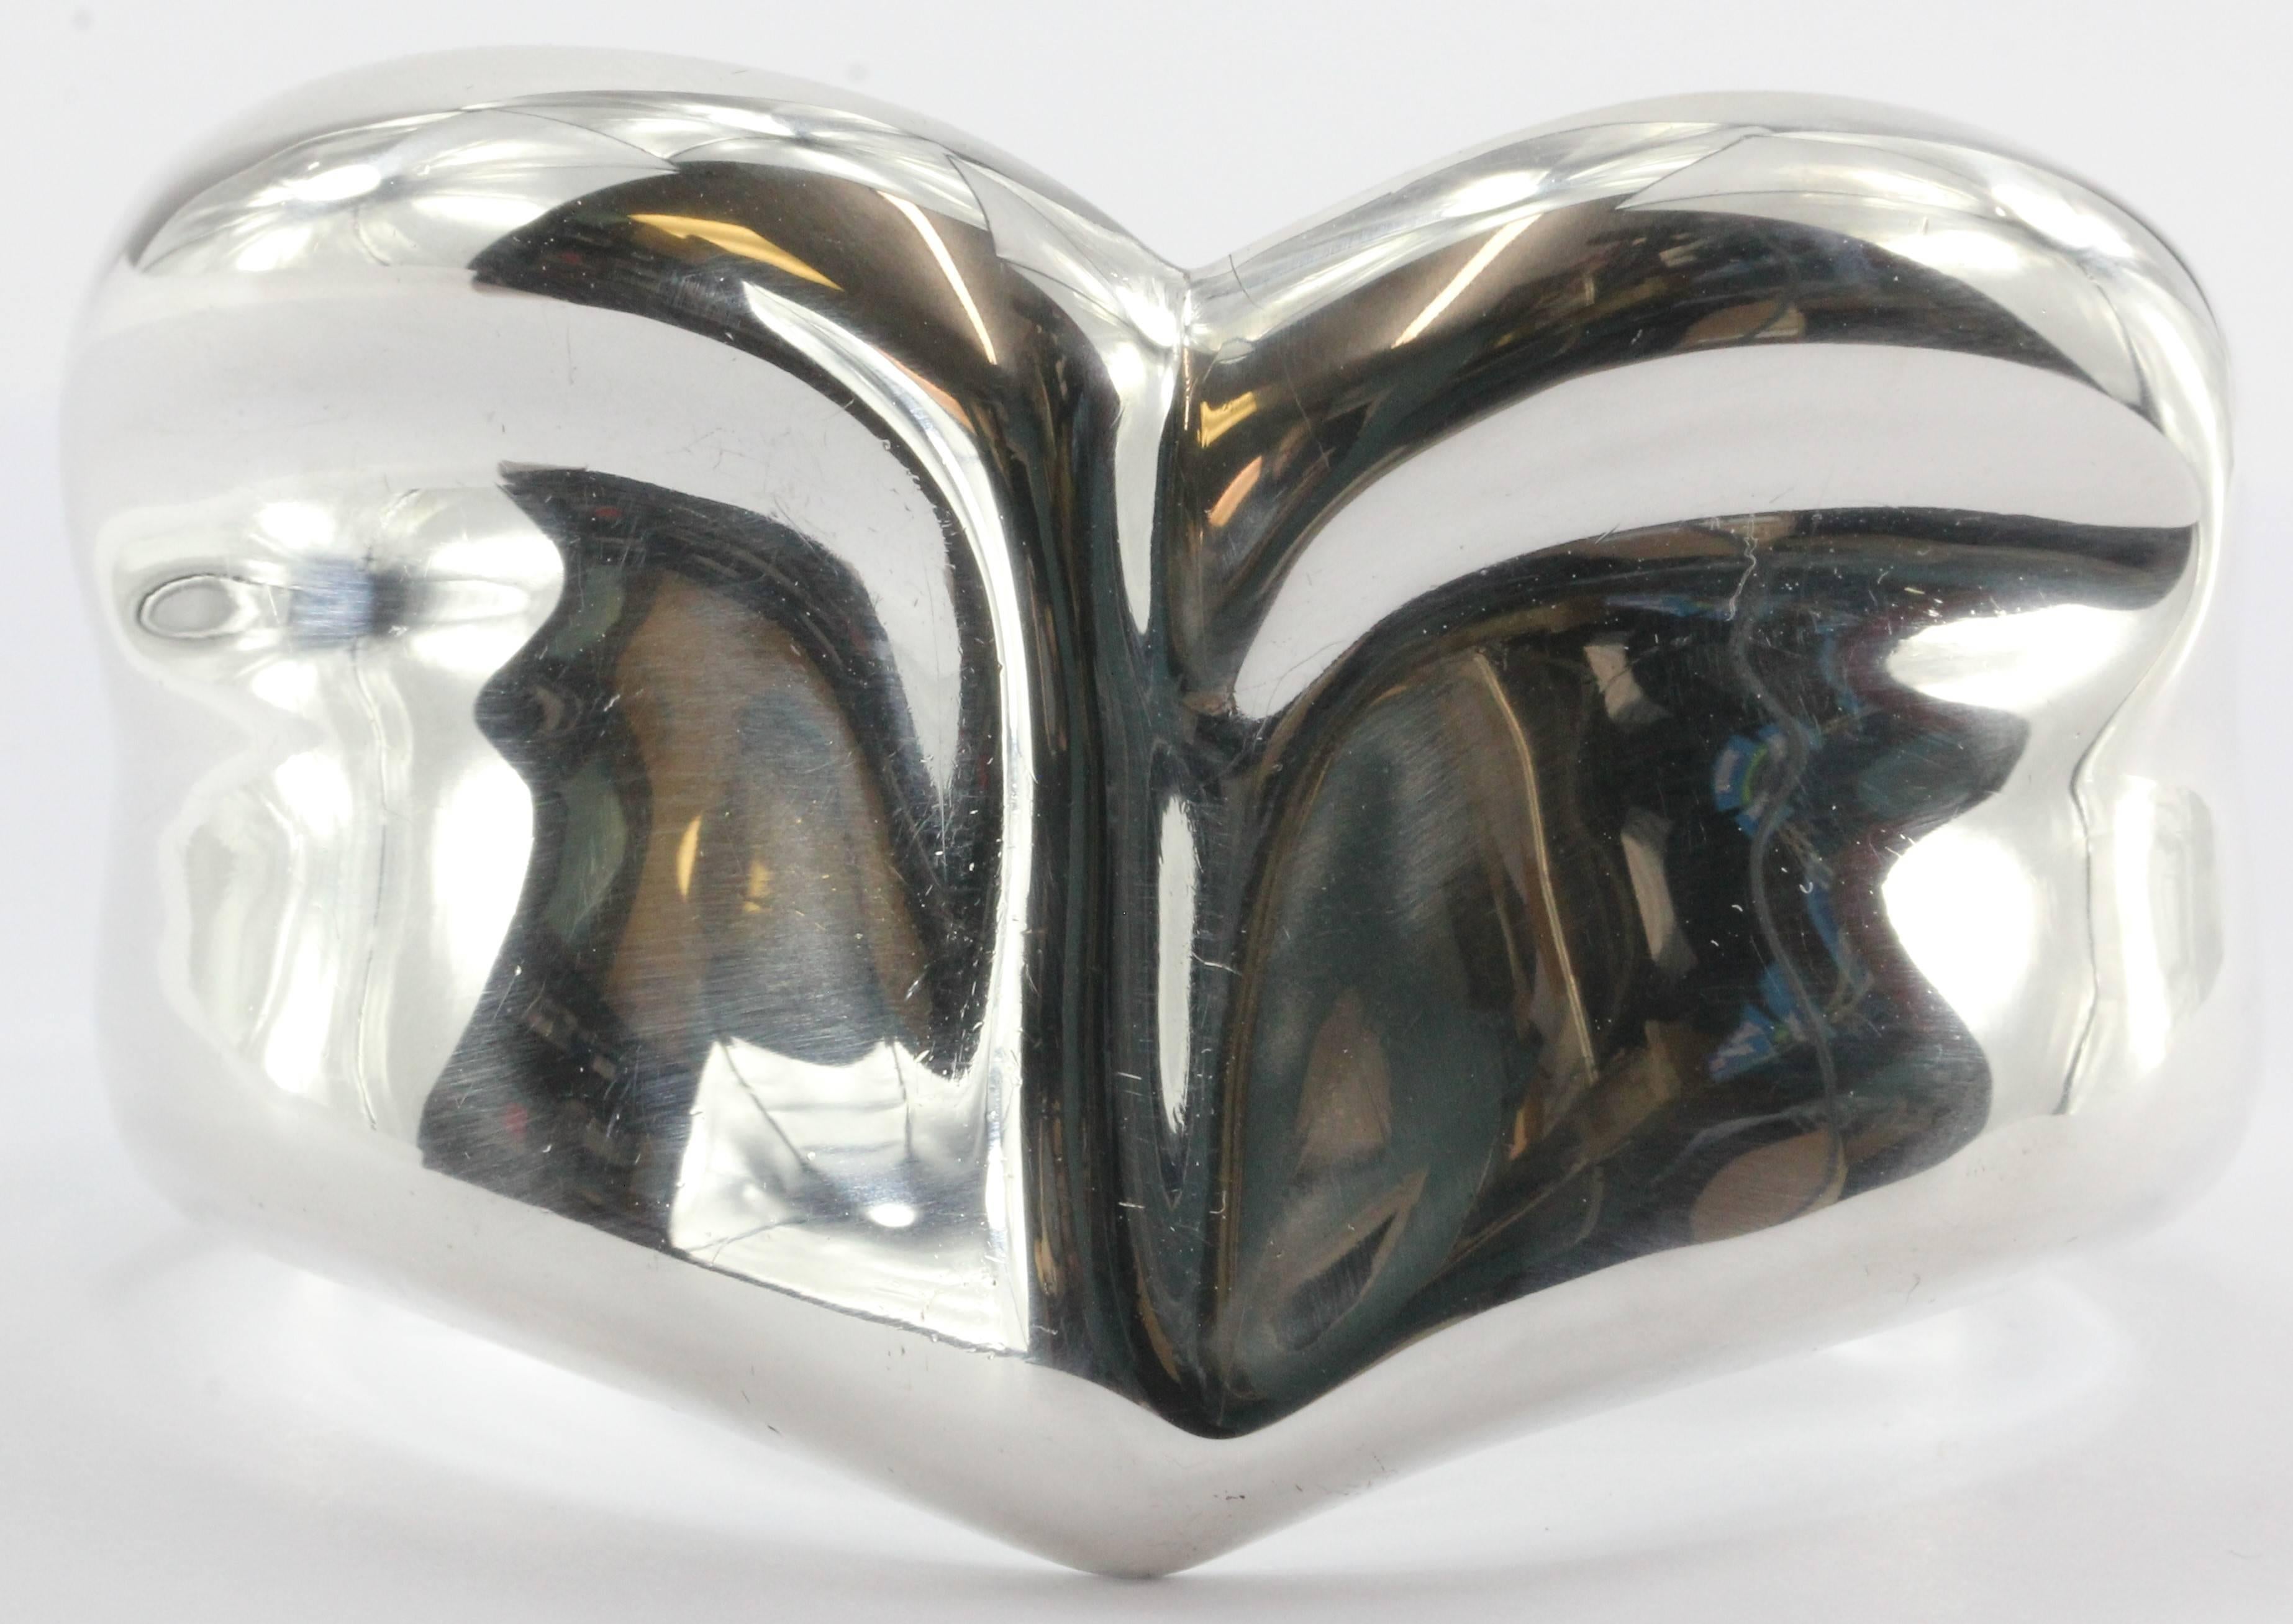 Vintage Tiffany & Co Elsa Peretti 1979 Large Chunky V Cuff Bracelet. The piece is in great used estate condition and ready to wear. It was just professionally polished. The piece is signed Peretti Tiffany & Co Italy 1979 Sterling 925.

The piece